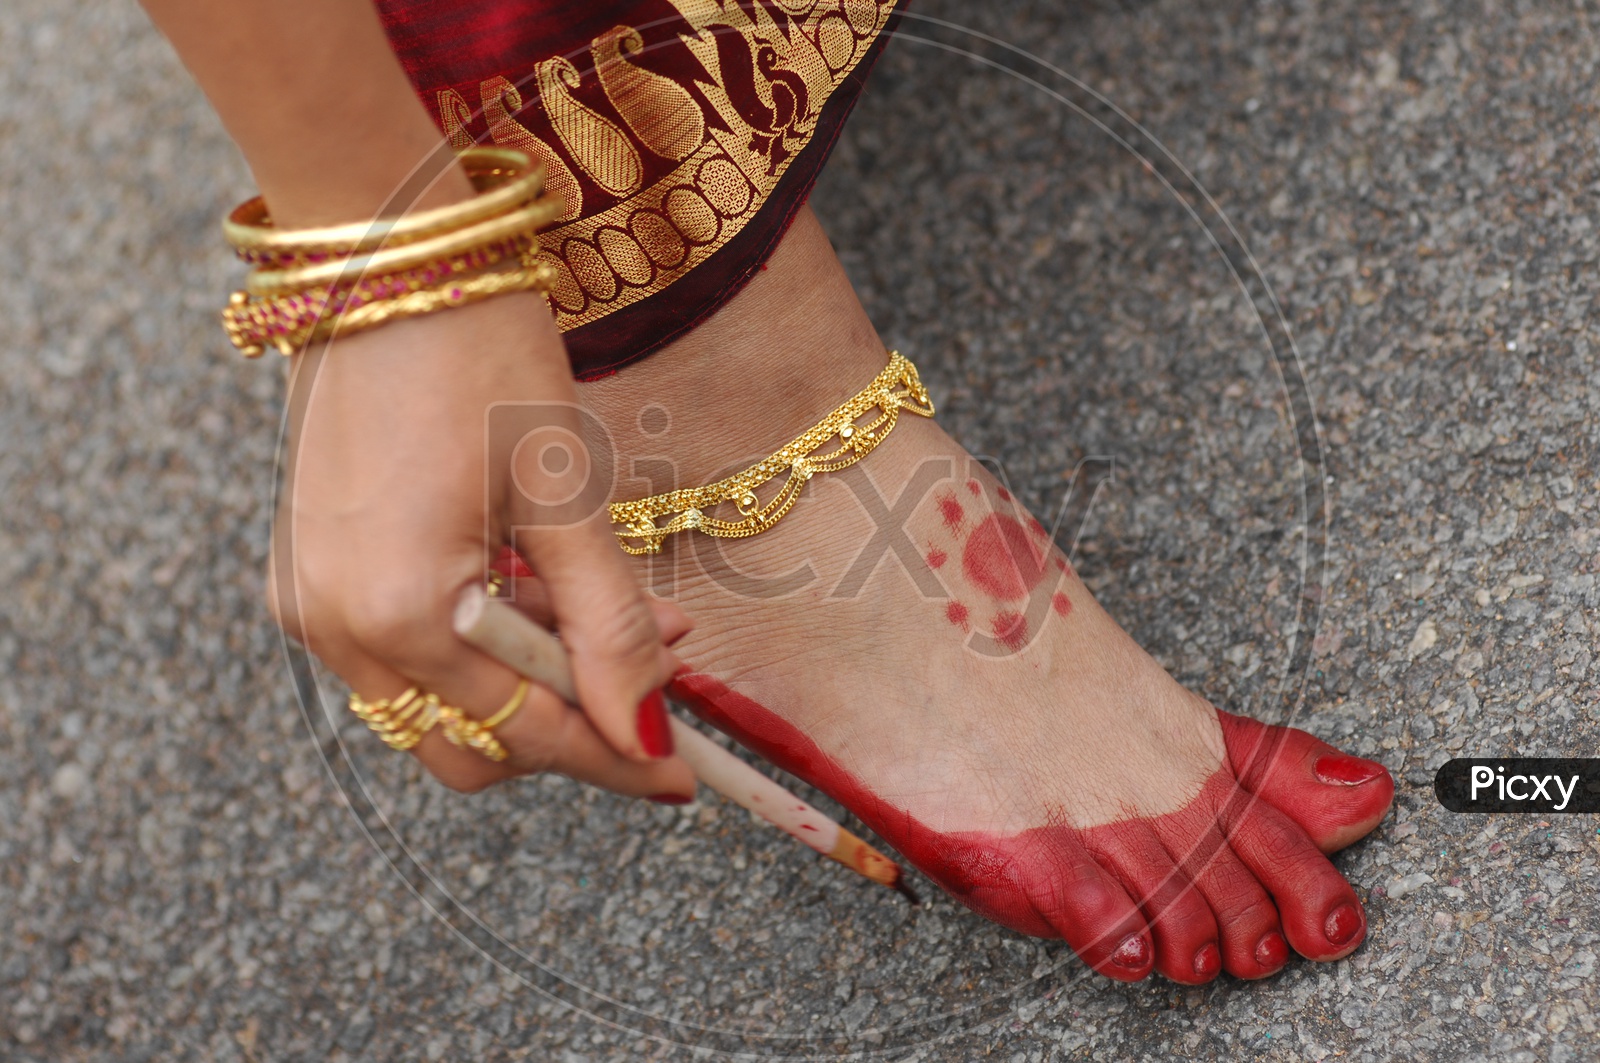 Red Mixture Or Paste Marked Foot  Or Parani  Marked Foot  Of  a Bride